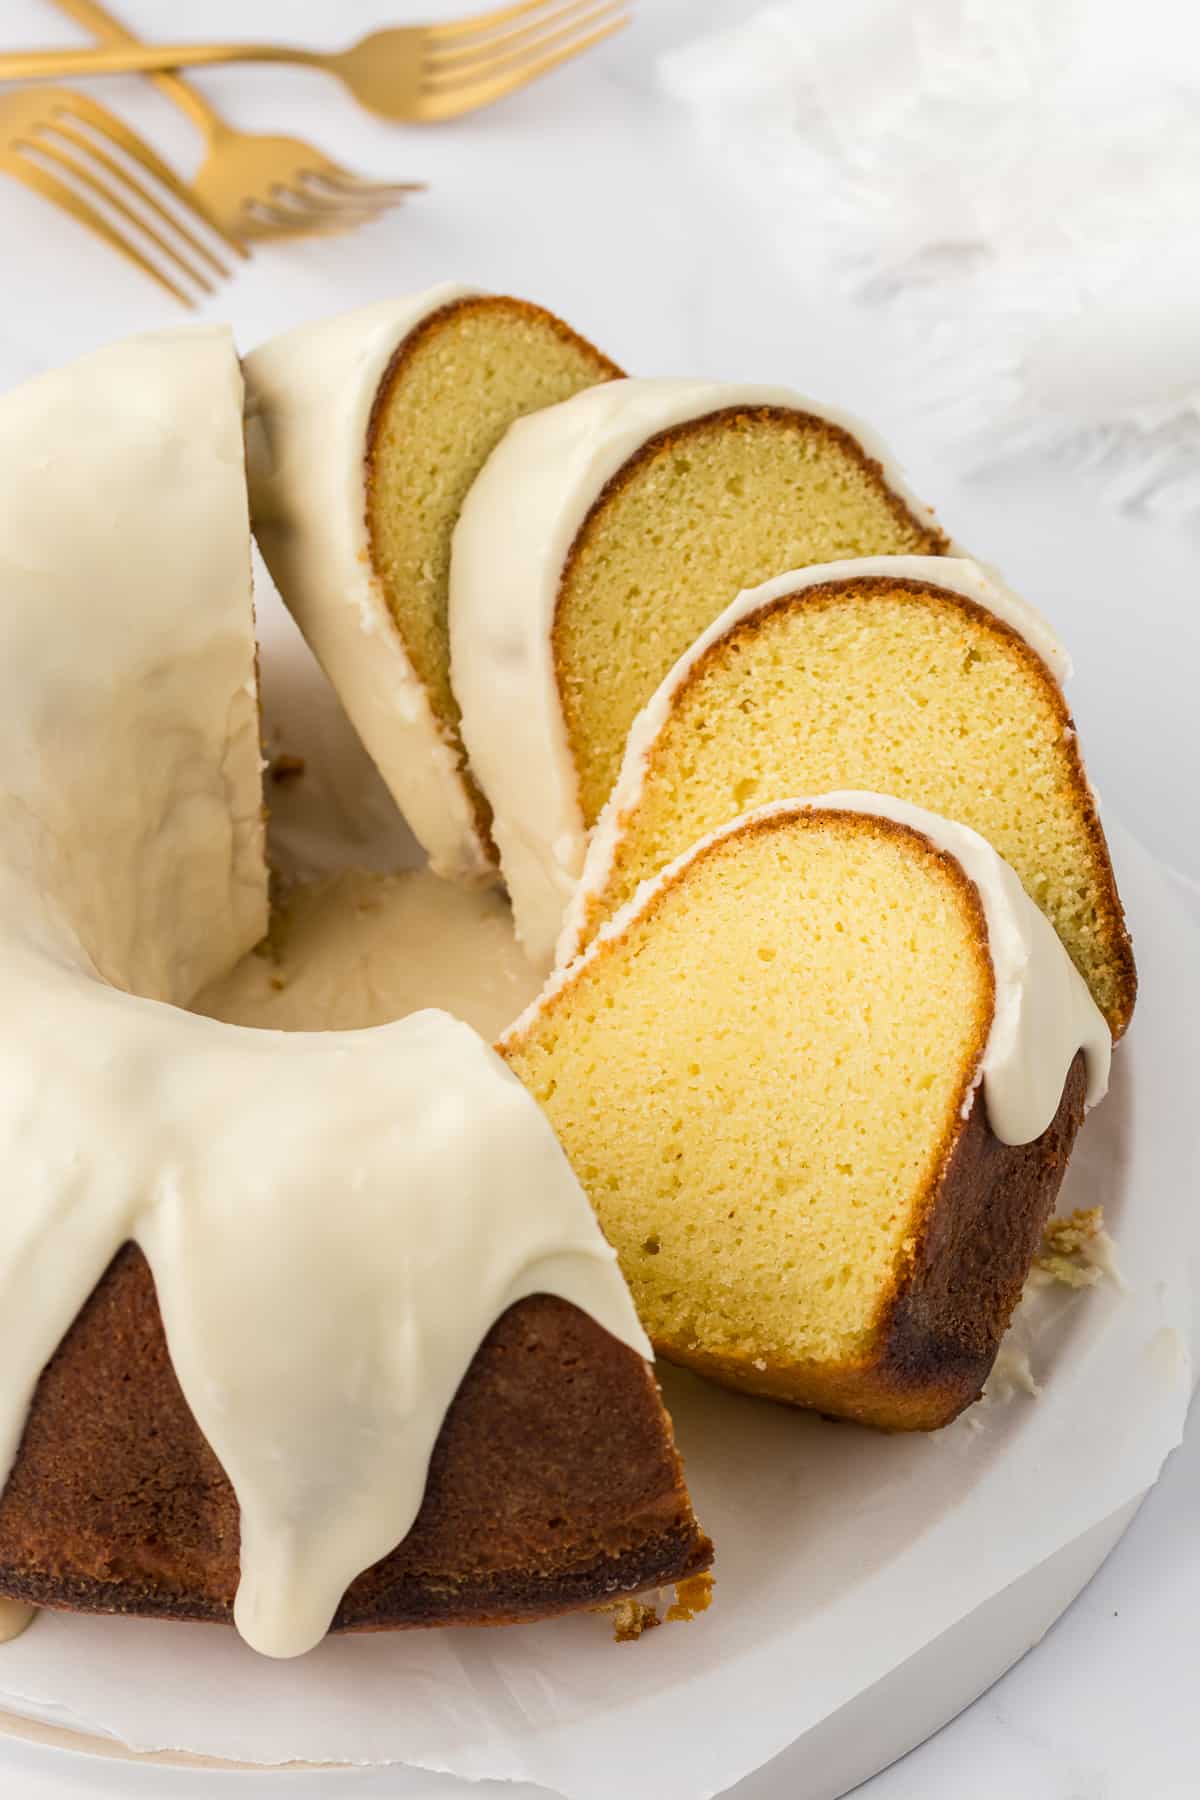 a vanilla bundt cake on a white surface with half the cake in slices and half whole, with three forks laying beside the cake